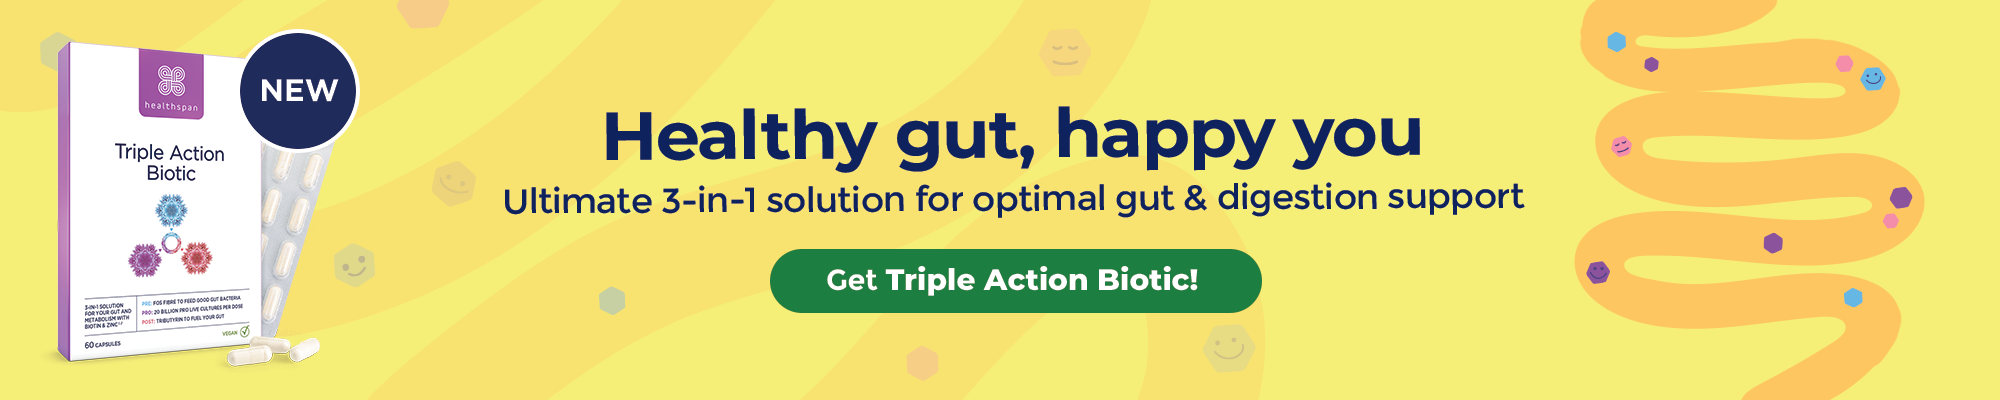 NEW! Triple Action Biotic. Ultimate 3-in-1 solution for optimal gut and digestion support. Buy now.